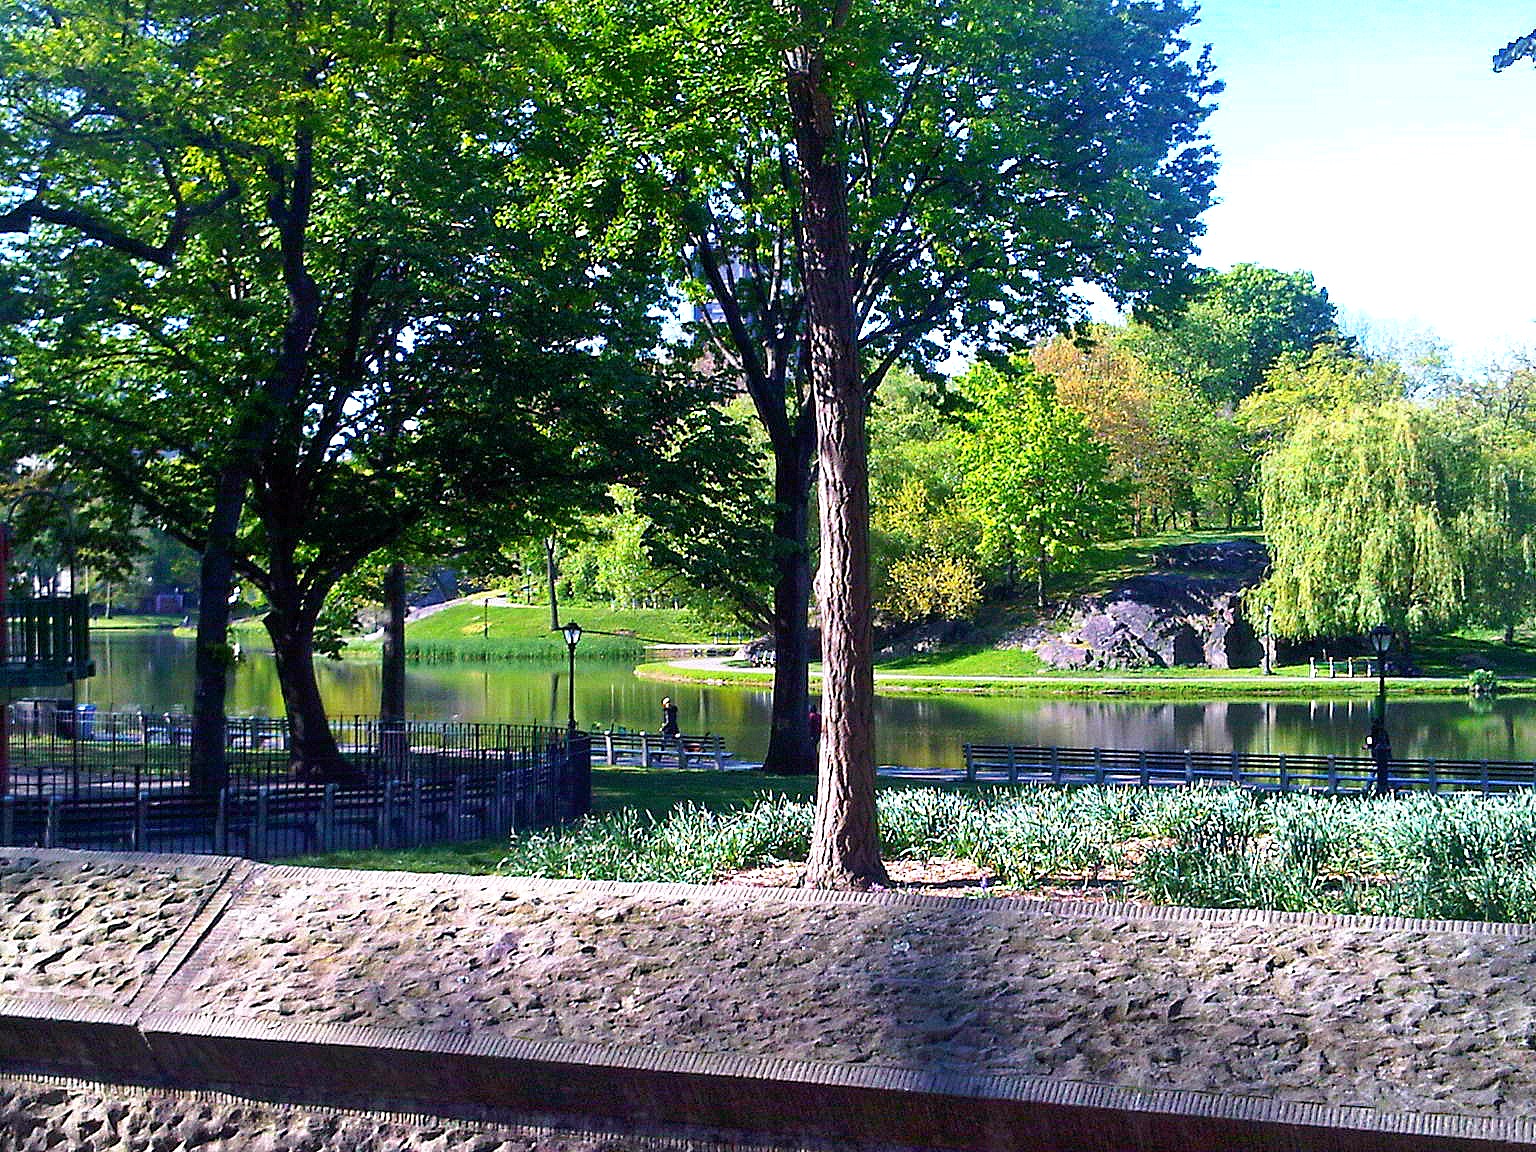 Central Park and the Harlem Meer in New York City